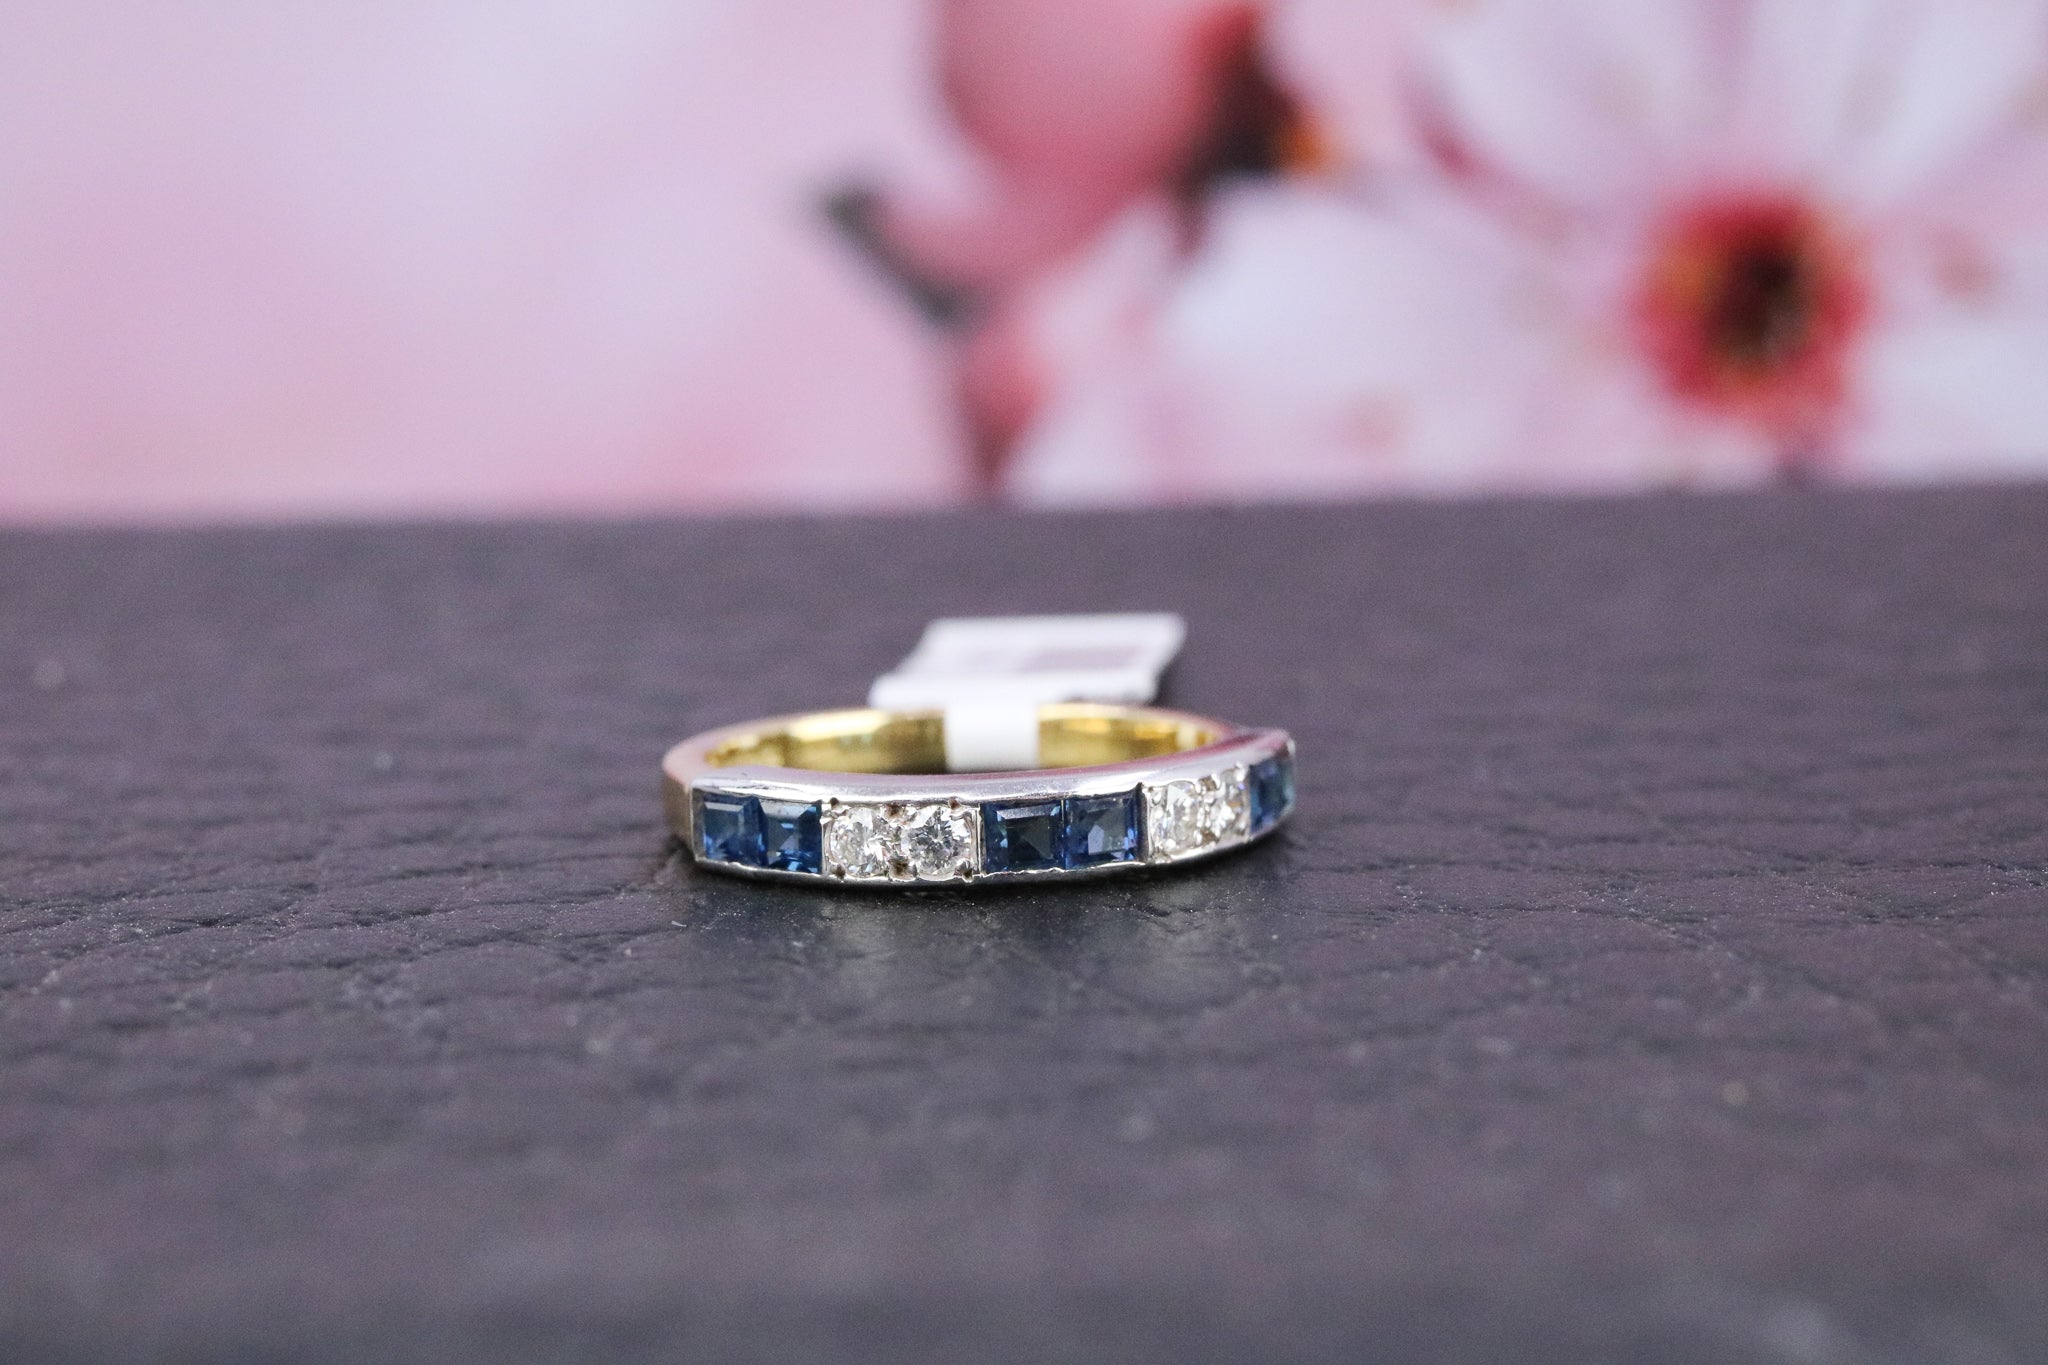 18ct Yellow Gold Diamond Ring - CO1154 - Hallmark Jewellers Formby & The Jewellers Bench Widnes